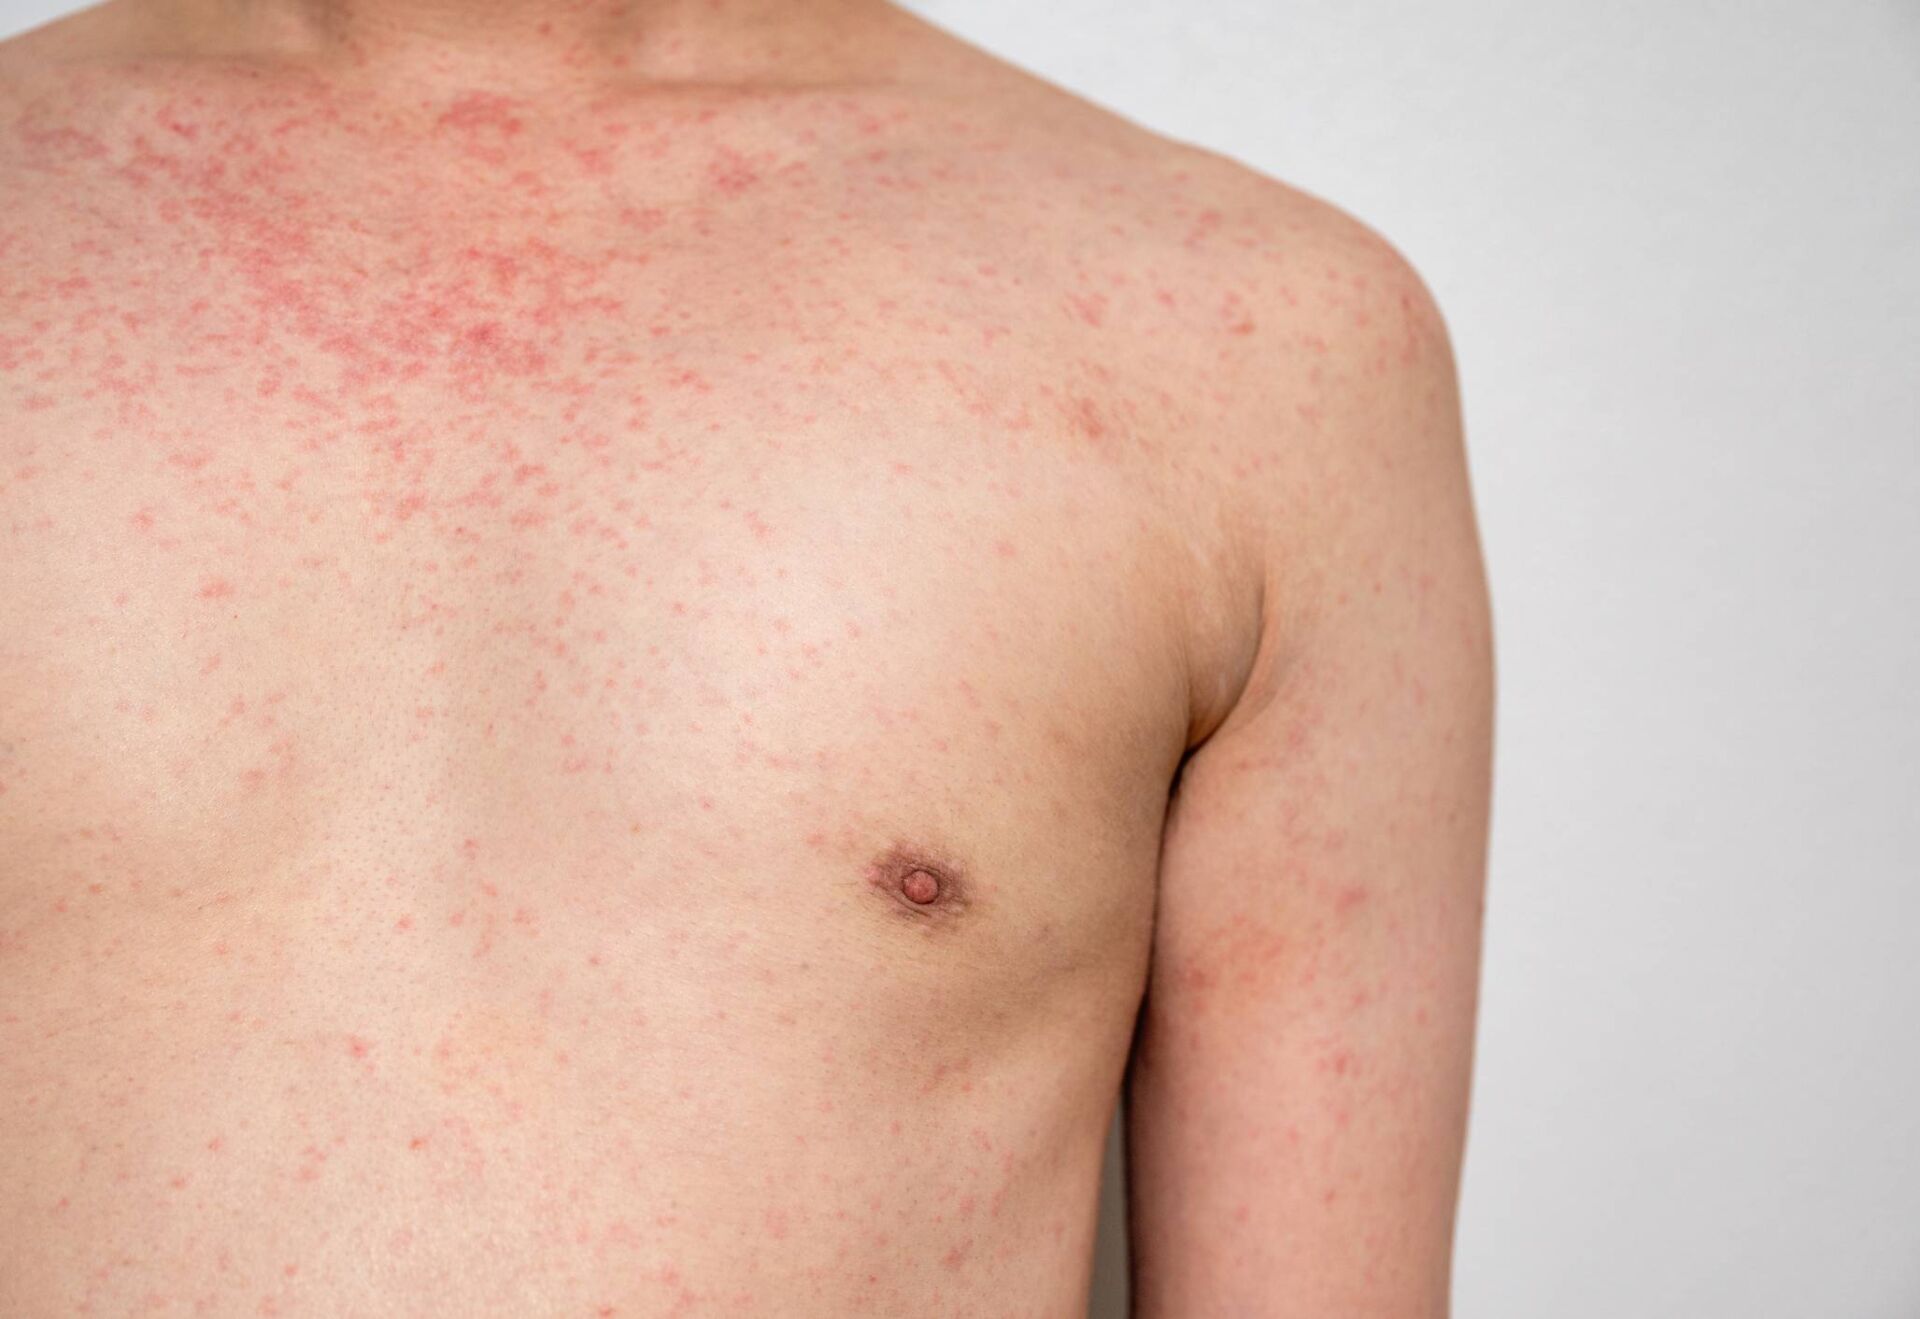 March sees highest number of measles cases yet as outbreak continues to spread